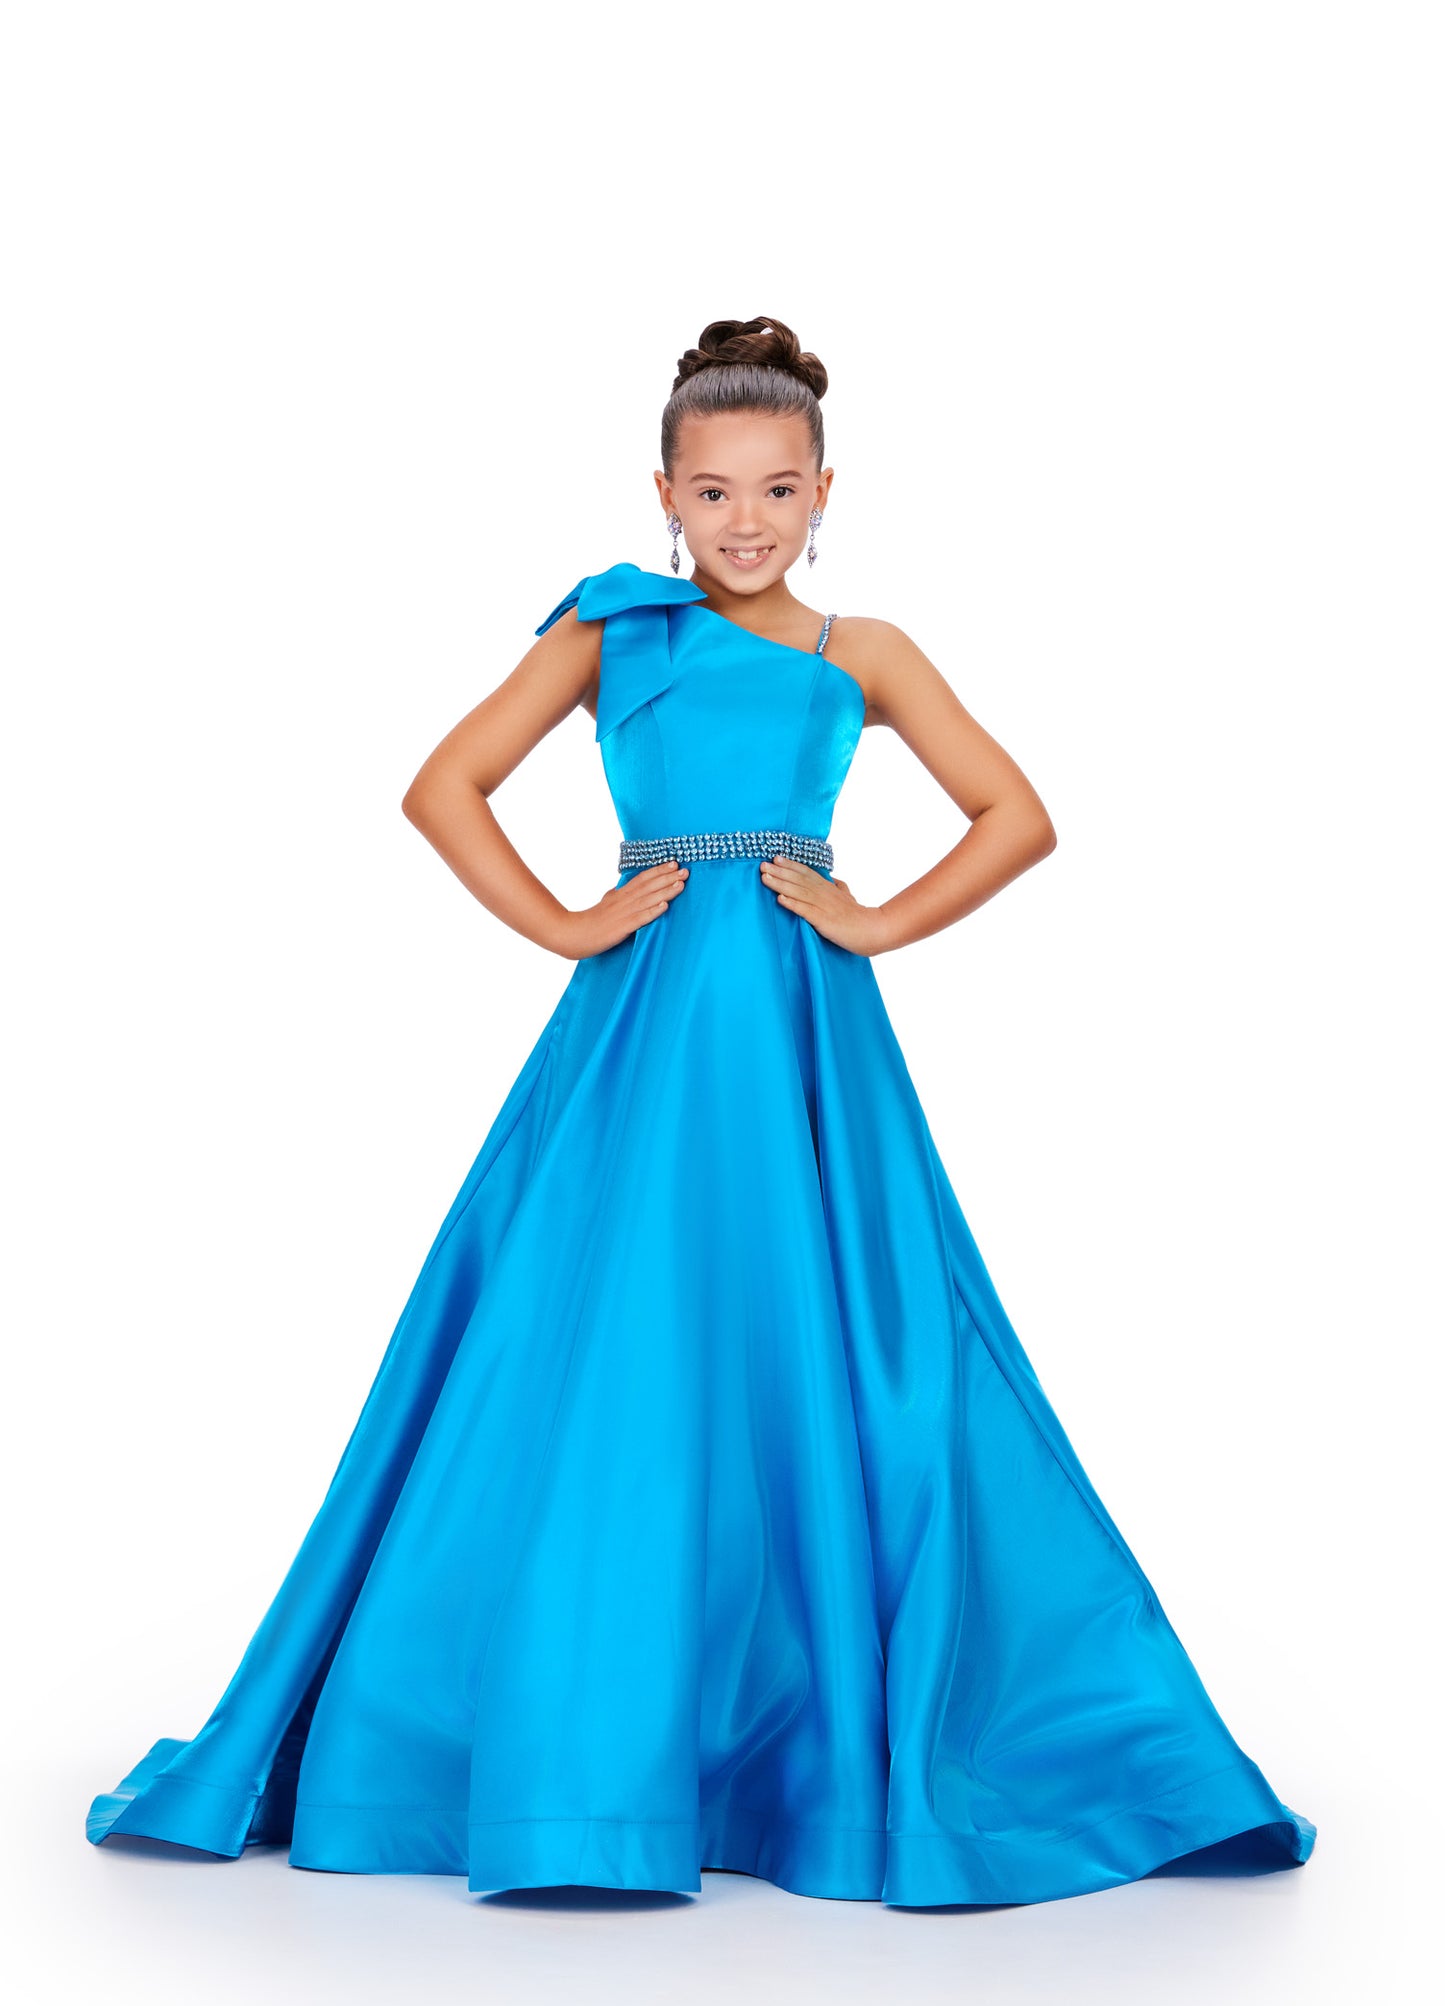 Expertly crafted for the pageant stage, the Ashley Lauren Kids 8248 dress is designed with a shimmering satin fabric and a unique one-shoulder bow for a touch of elegance. Its A-line silhouette flatters any figure while making a stunning statement. Perfect for a winning performance. This beautiful satin gown features a one shoulder neckline with bow. The look is complete with a rhinestone belt and full skirt.